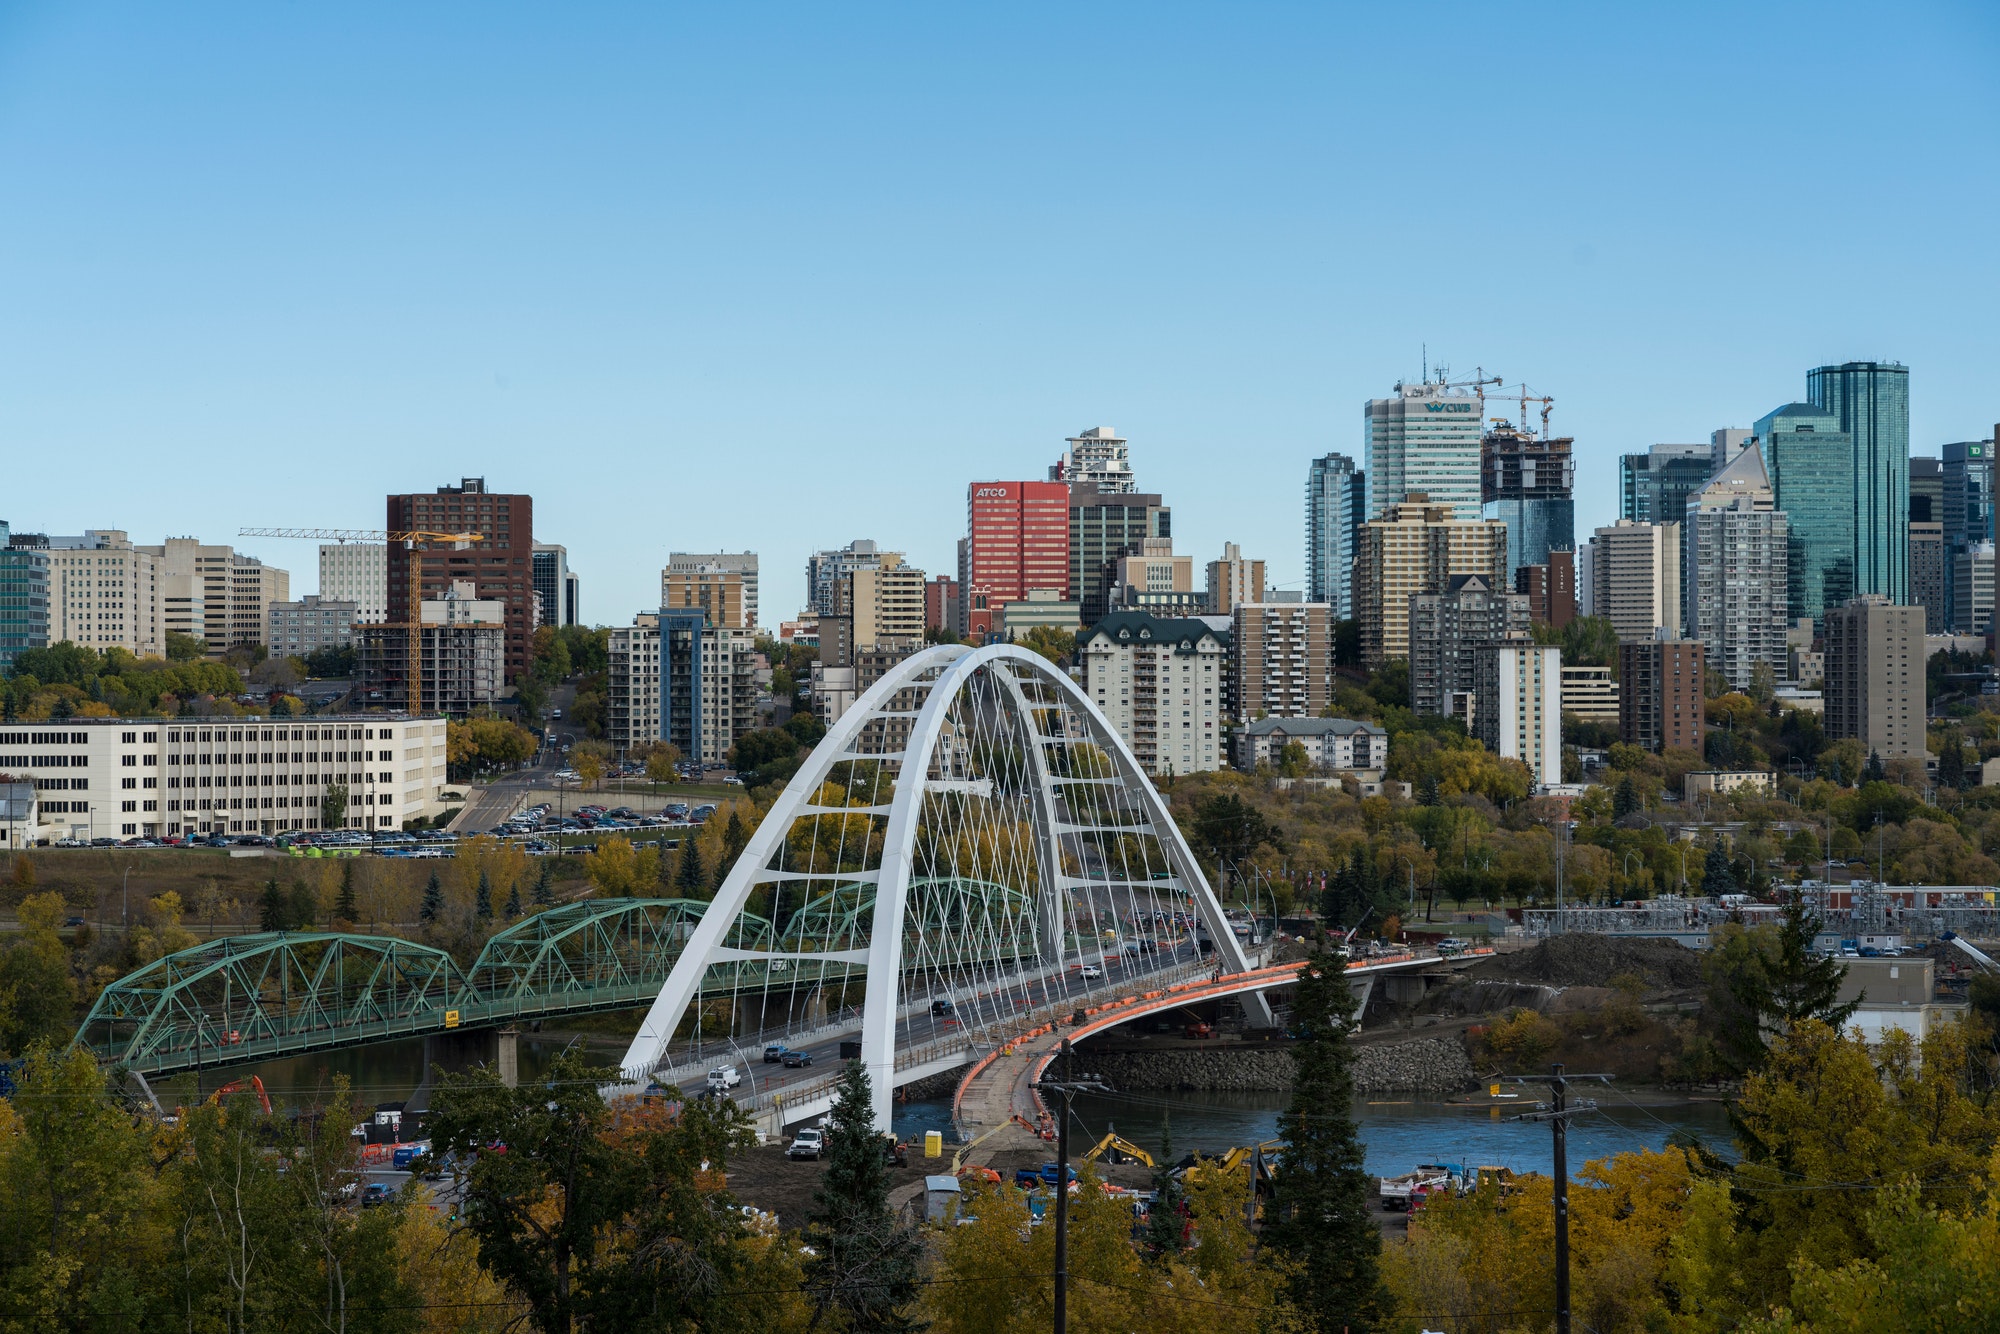 Bird's eye view of trees with a background of the Edmonton cityscape